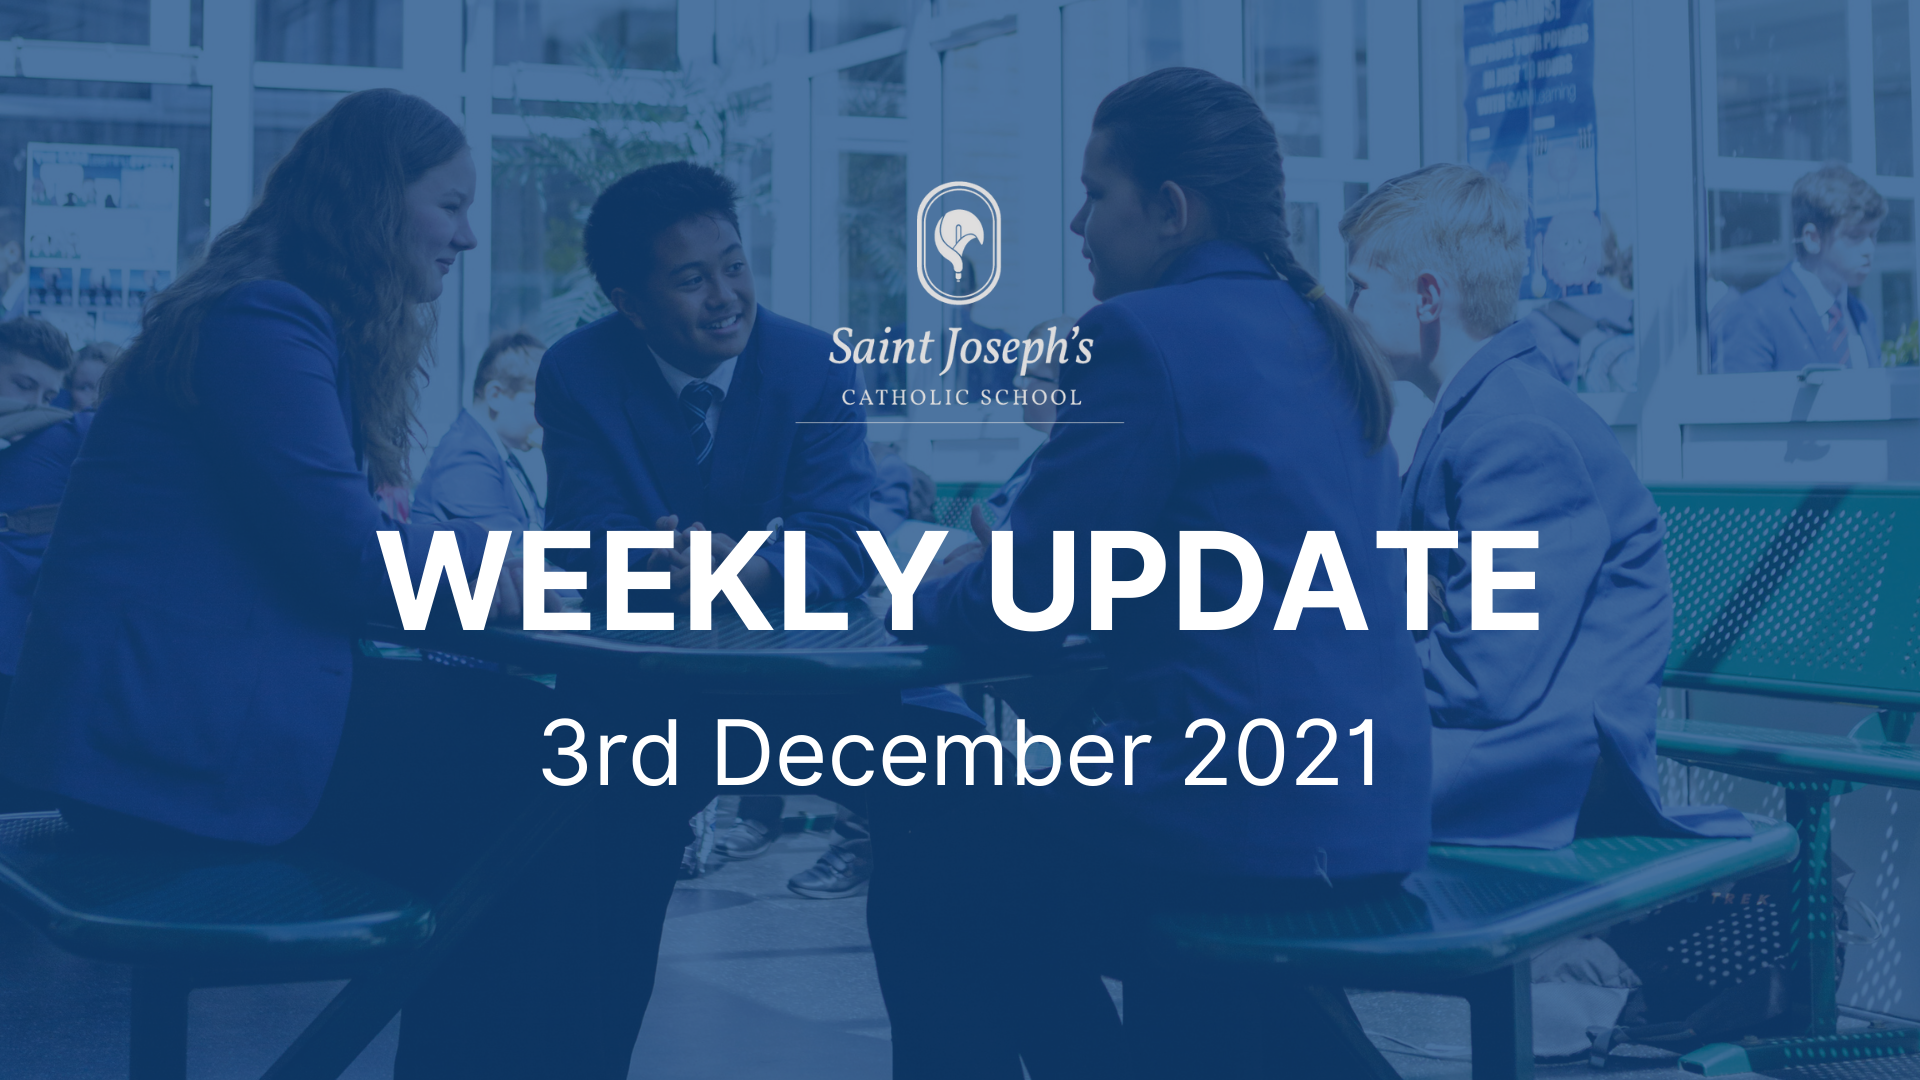 Featured image for “Weekly Update: 3rd December 2021”